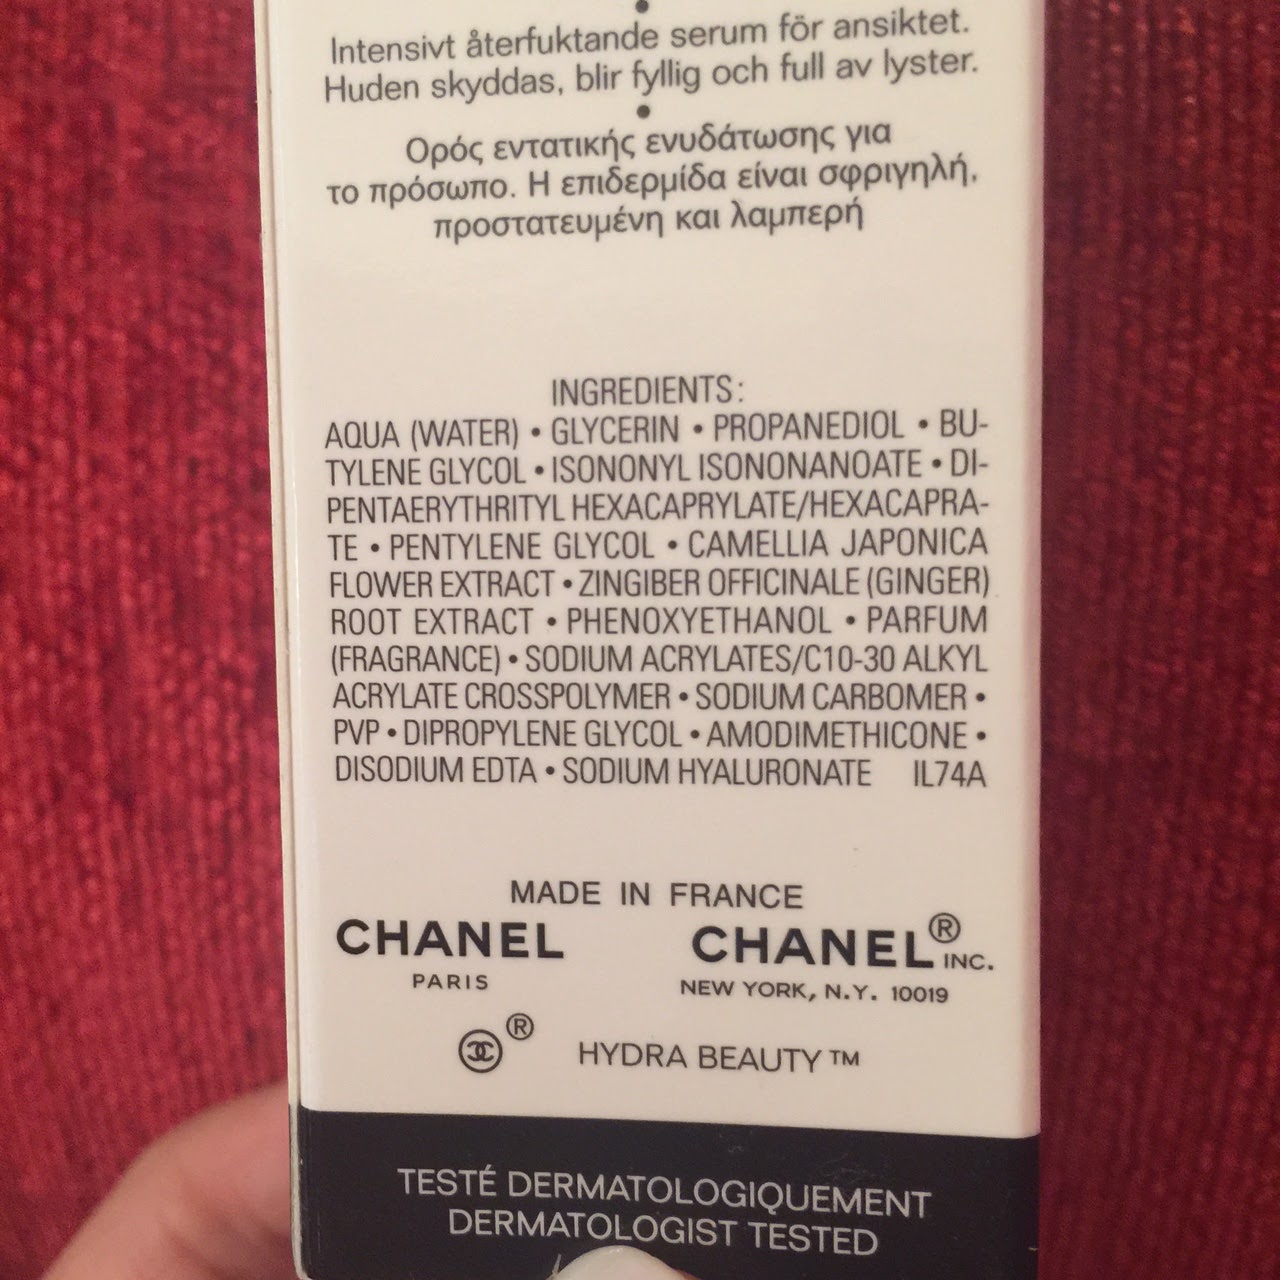 Chanel Hydra Beauty Micro Sérum ingredients (Explained)